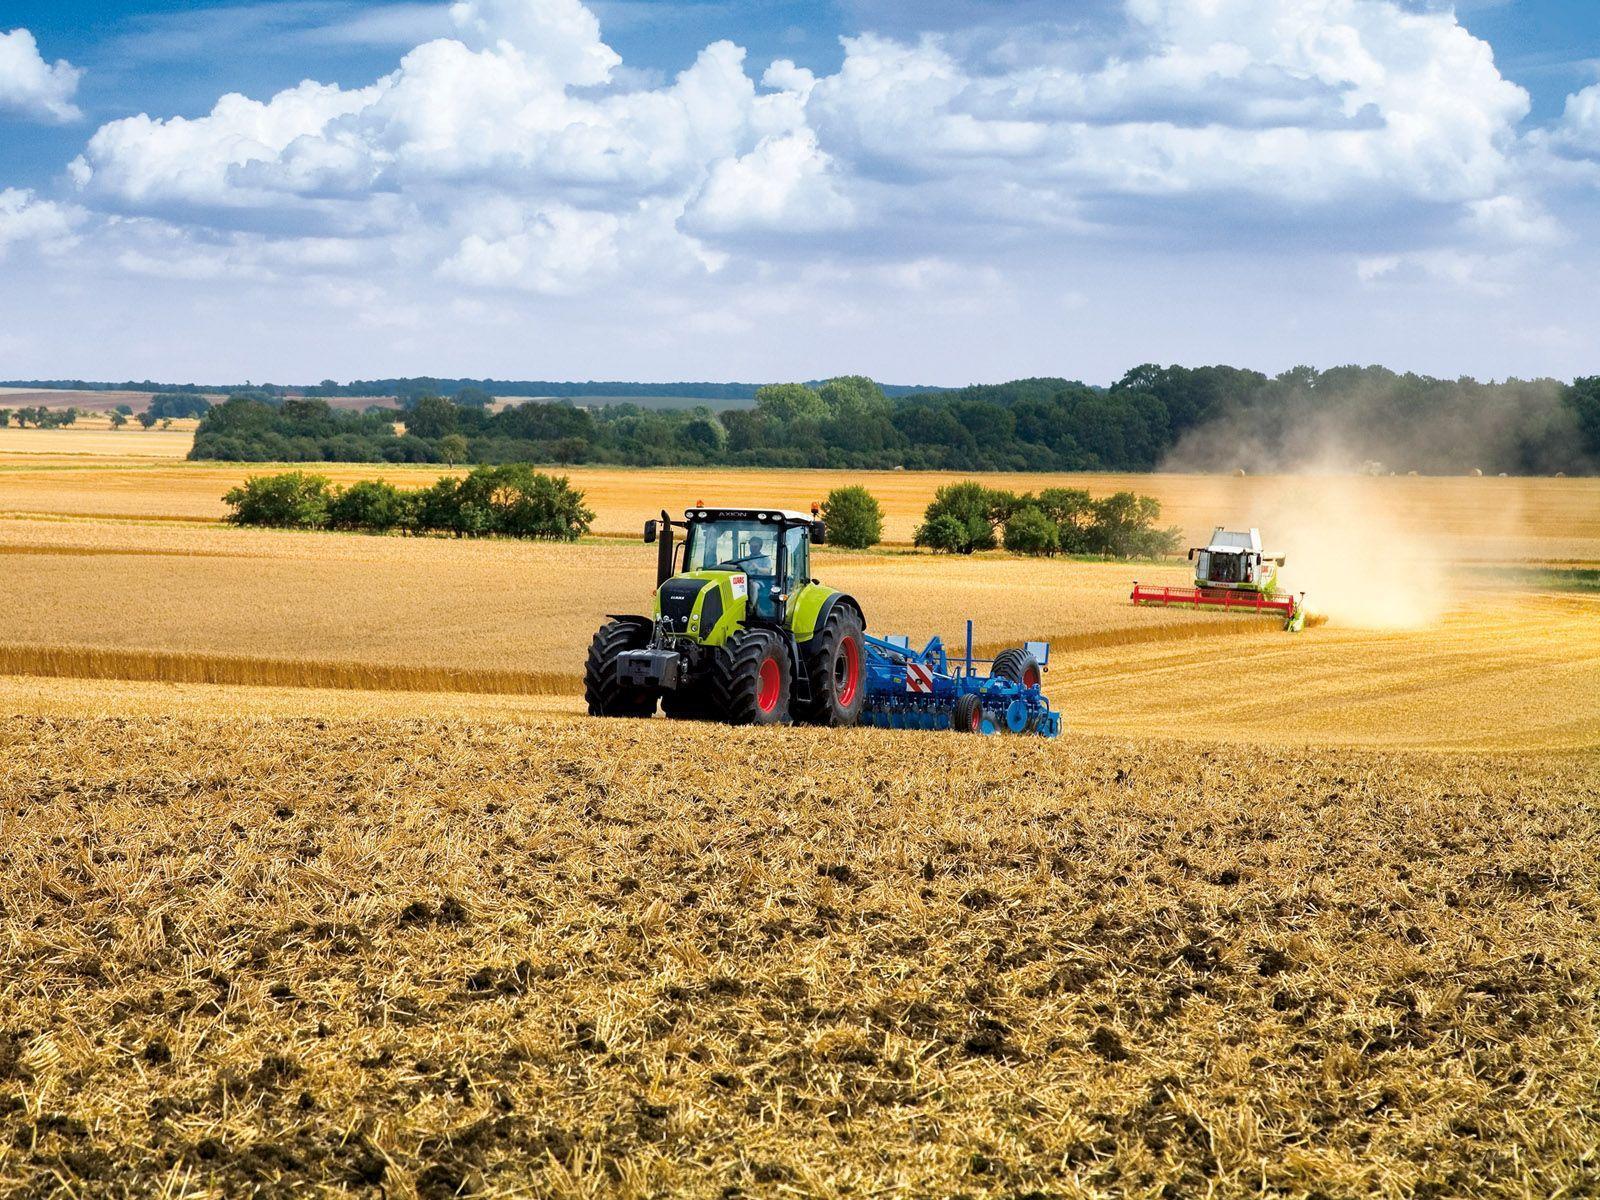 Claas Wallpaper, HDQ Claas Image Collection for Desktop, VV.477